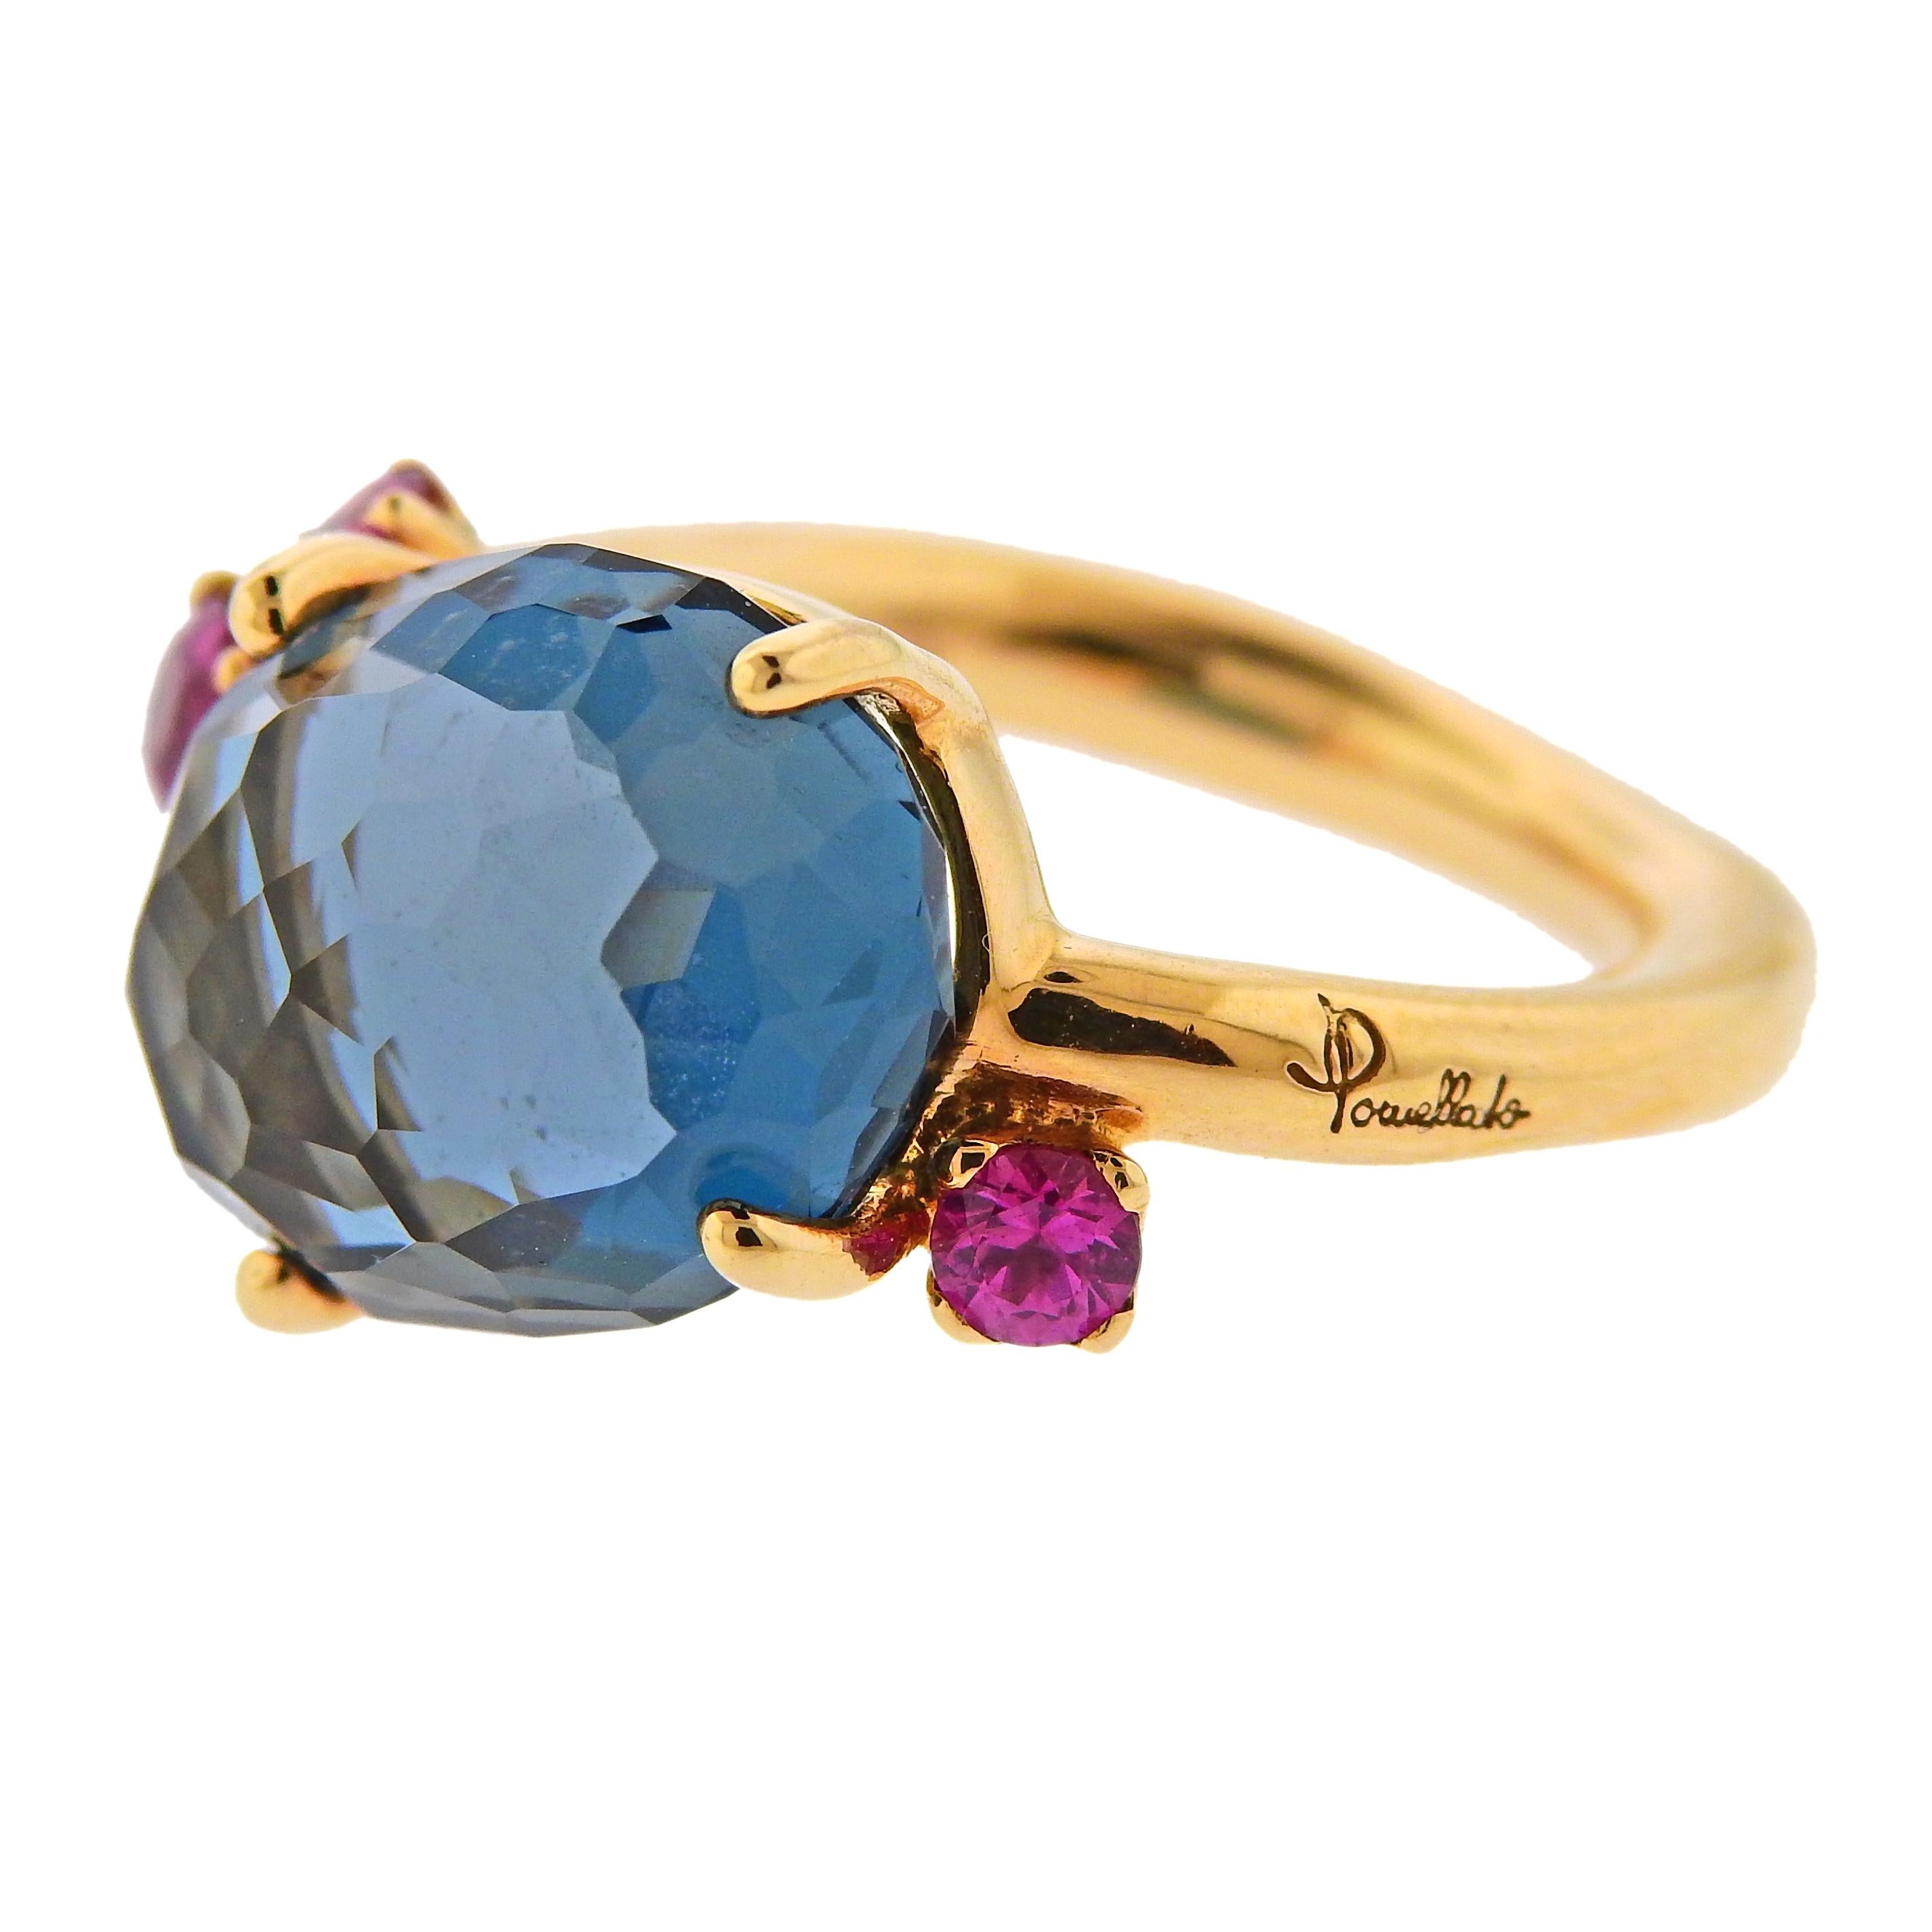 18k gold ring crafted by Pomellato for the Bahia collection. Features London blue topaz center stone and rubies. Ring size -6, ring top - 13mm x 19mm. Weight 8.9 grams. Marked: Pomellato, 750, Serial number. 